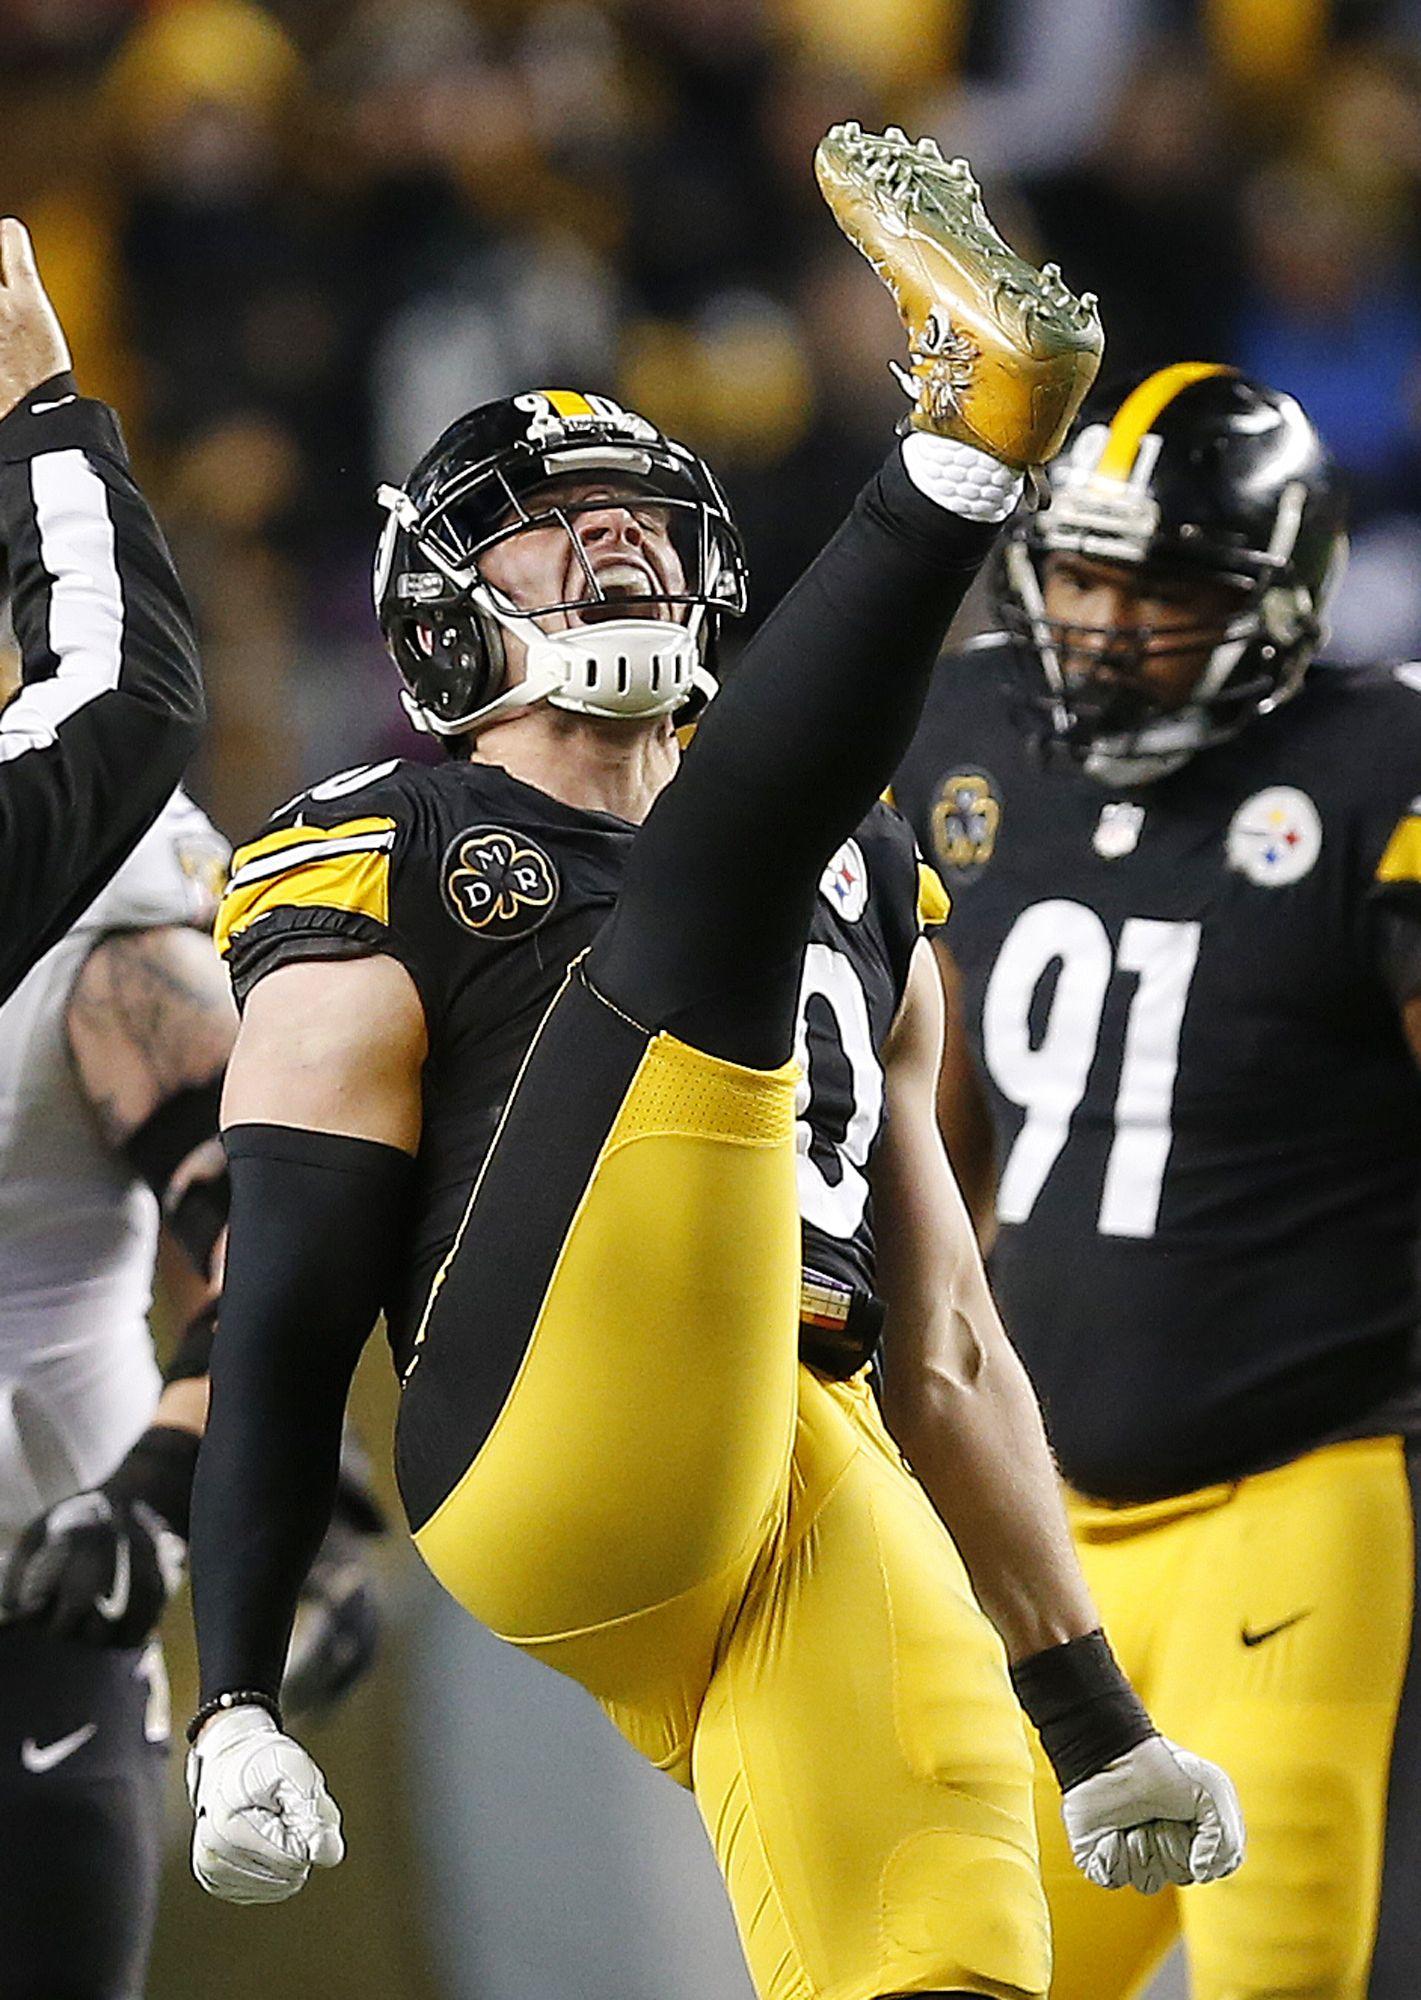 You think T.J. Watt of the #Pittsburgh Steelers was stoked